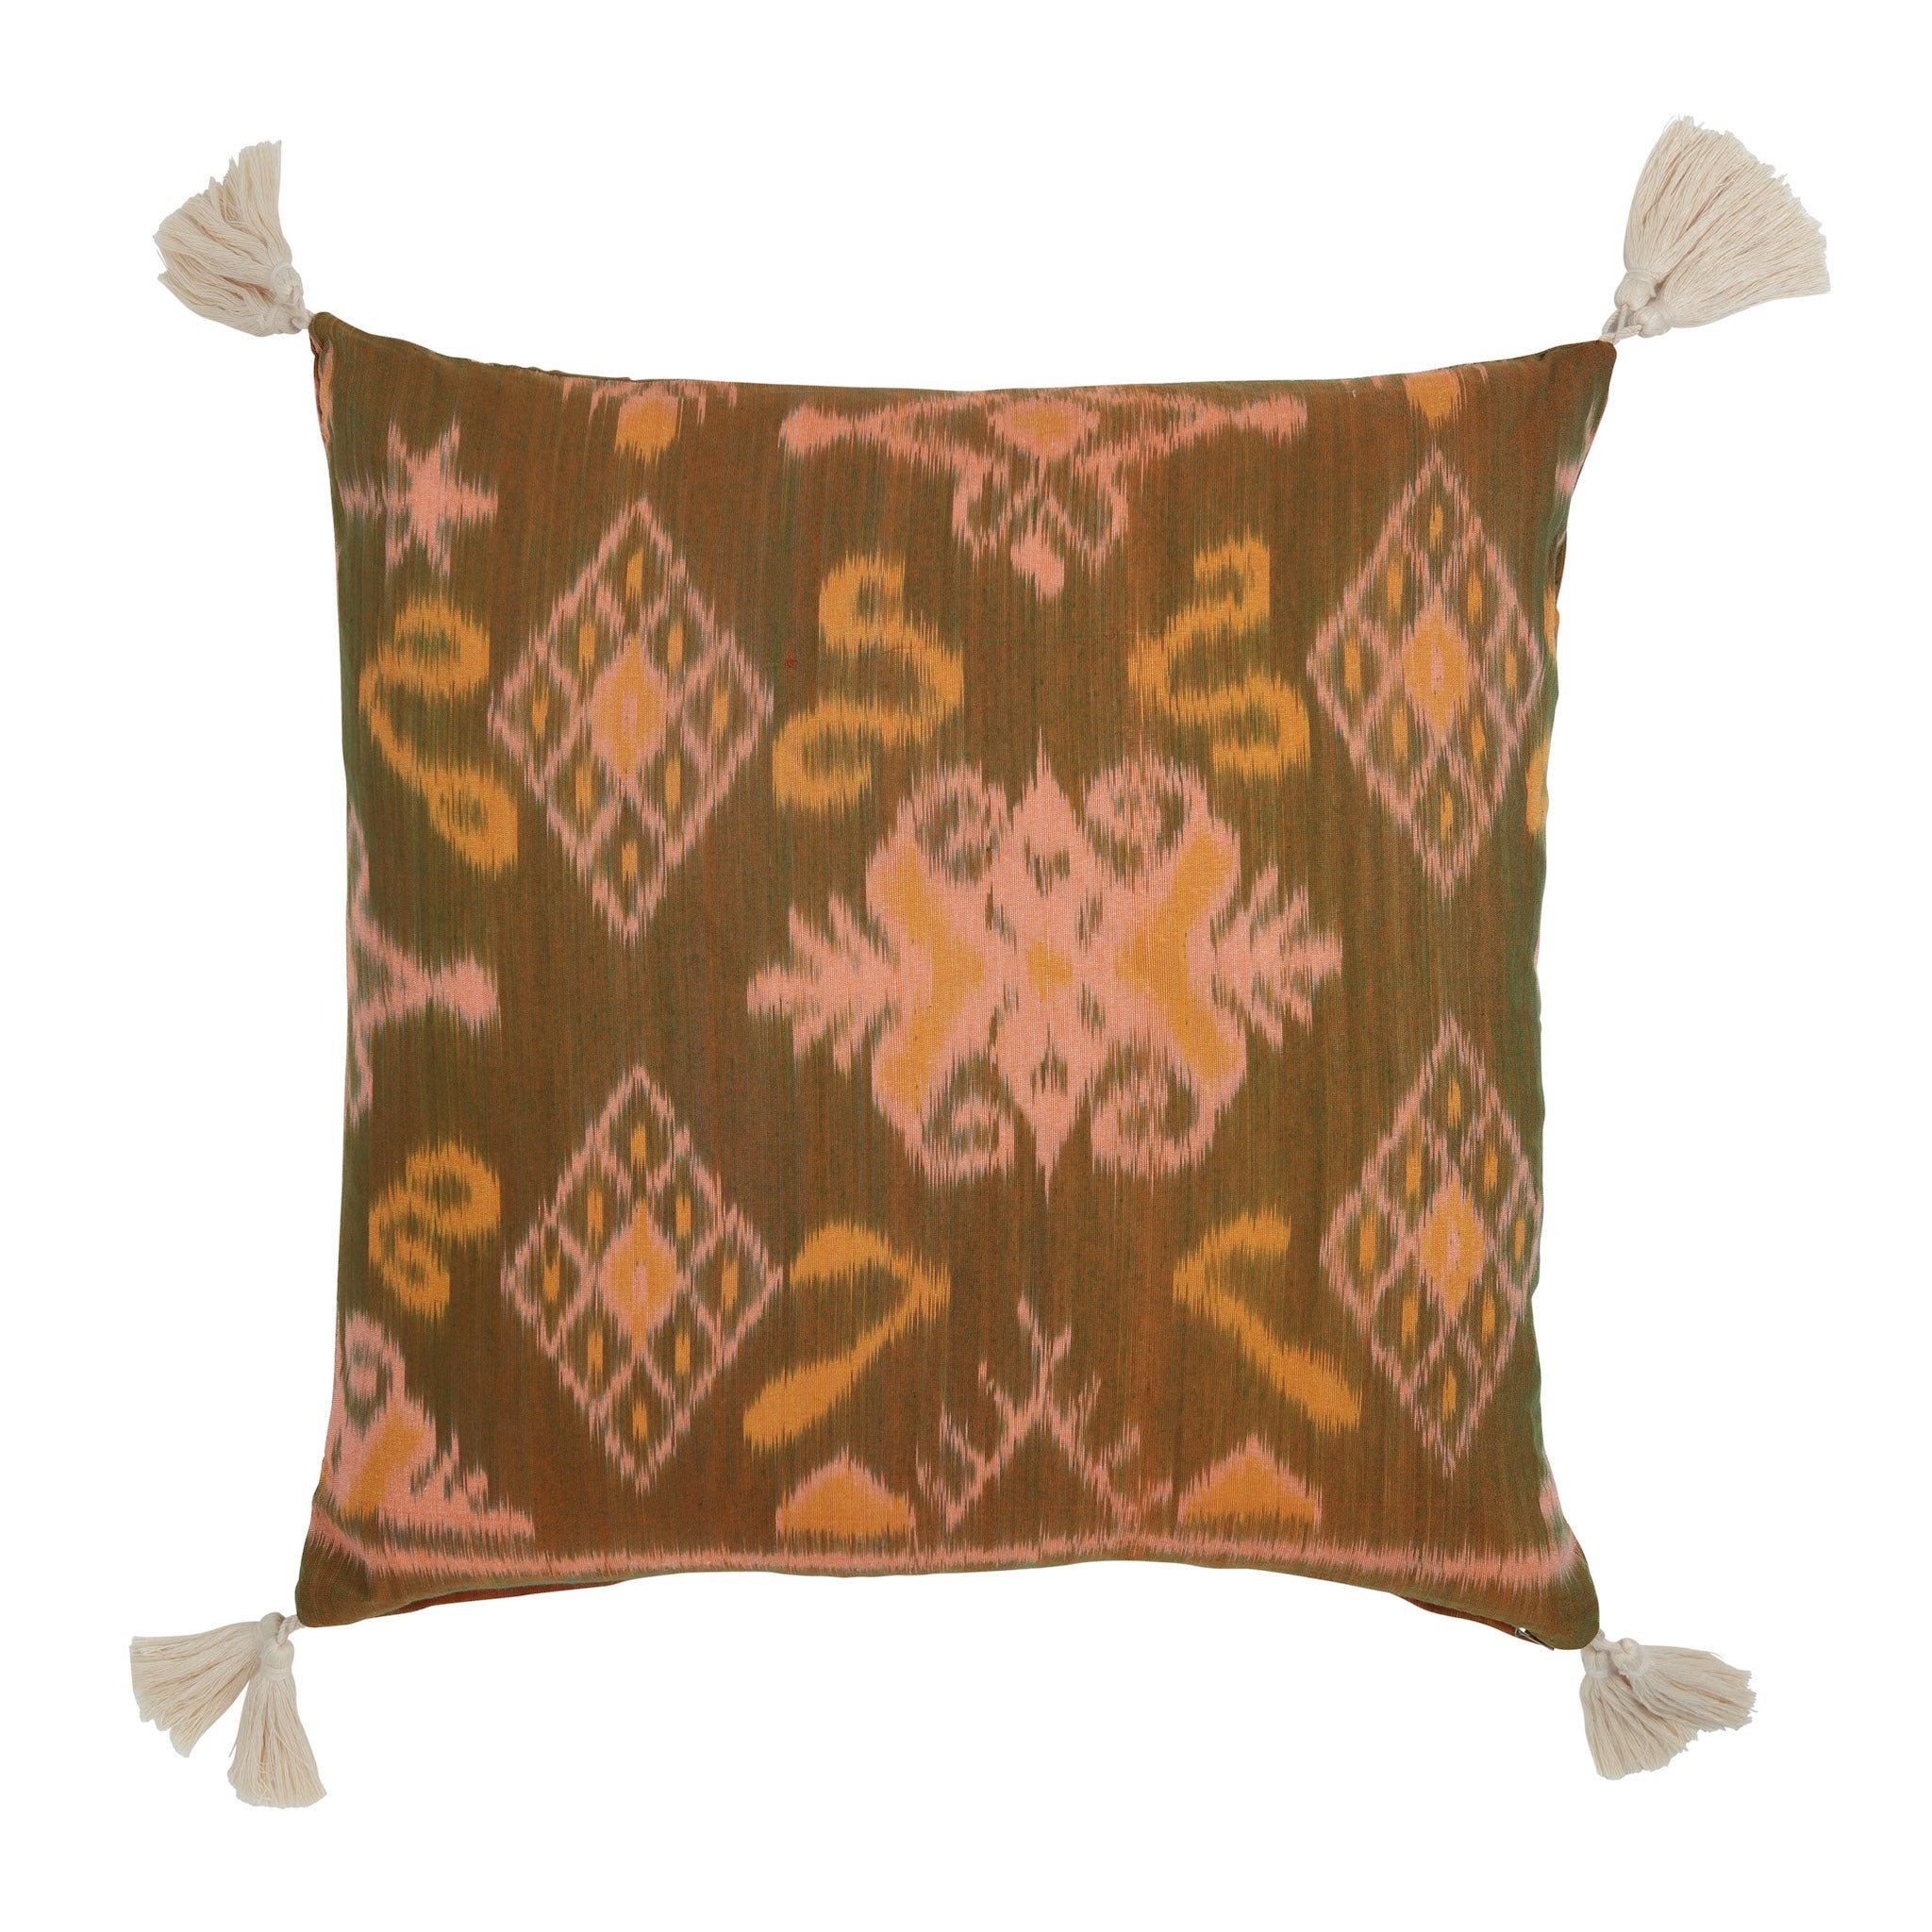 Peach and Olive Green Cotton Ikat Square Scatter Cushion with Tassels from Bali, Indonesia - FRONT